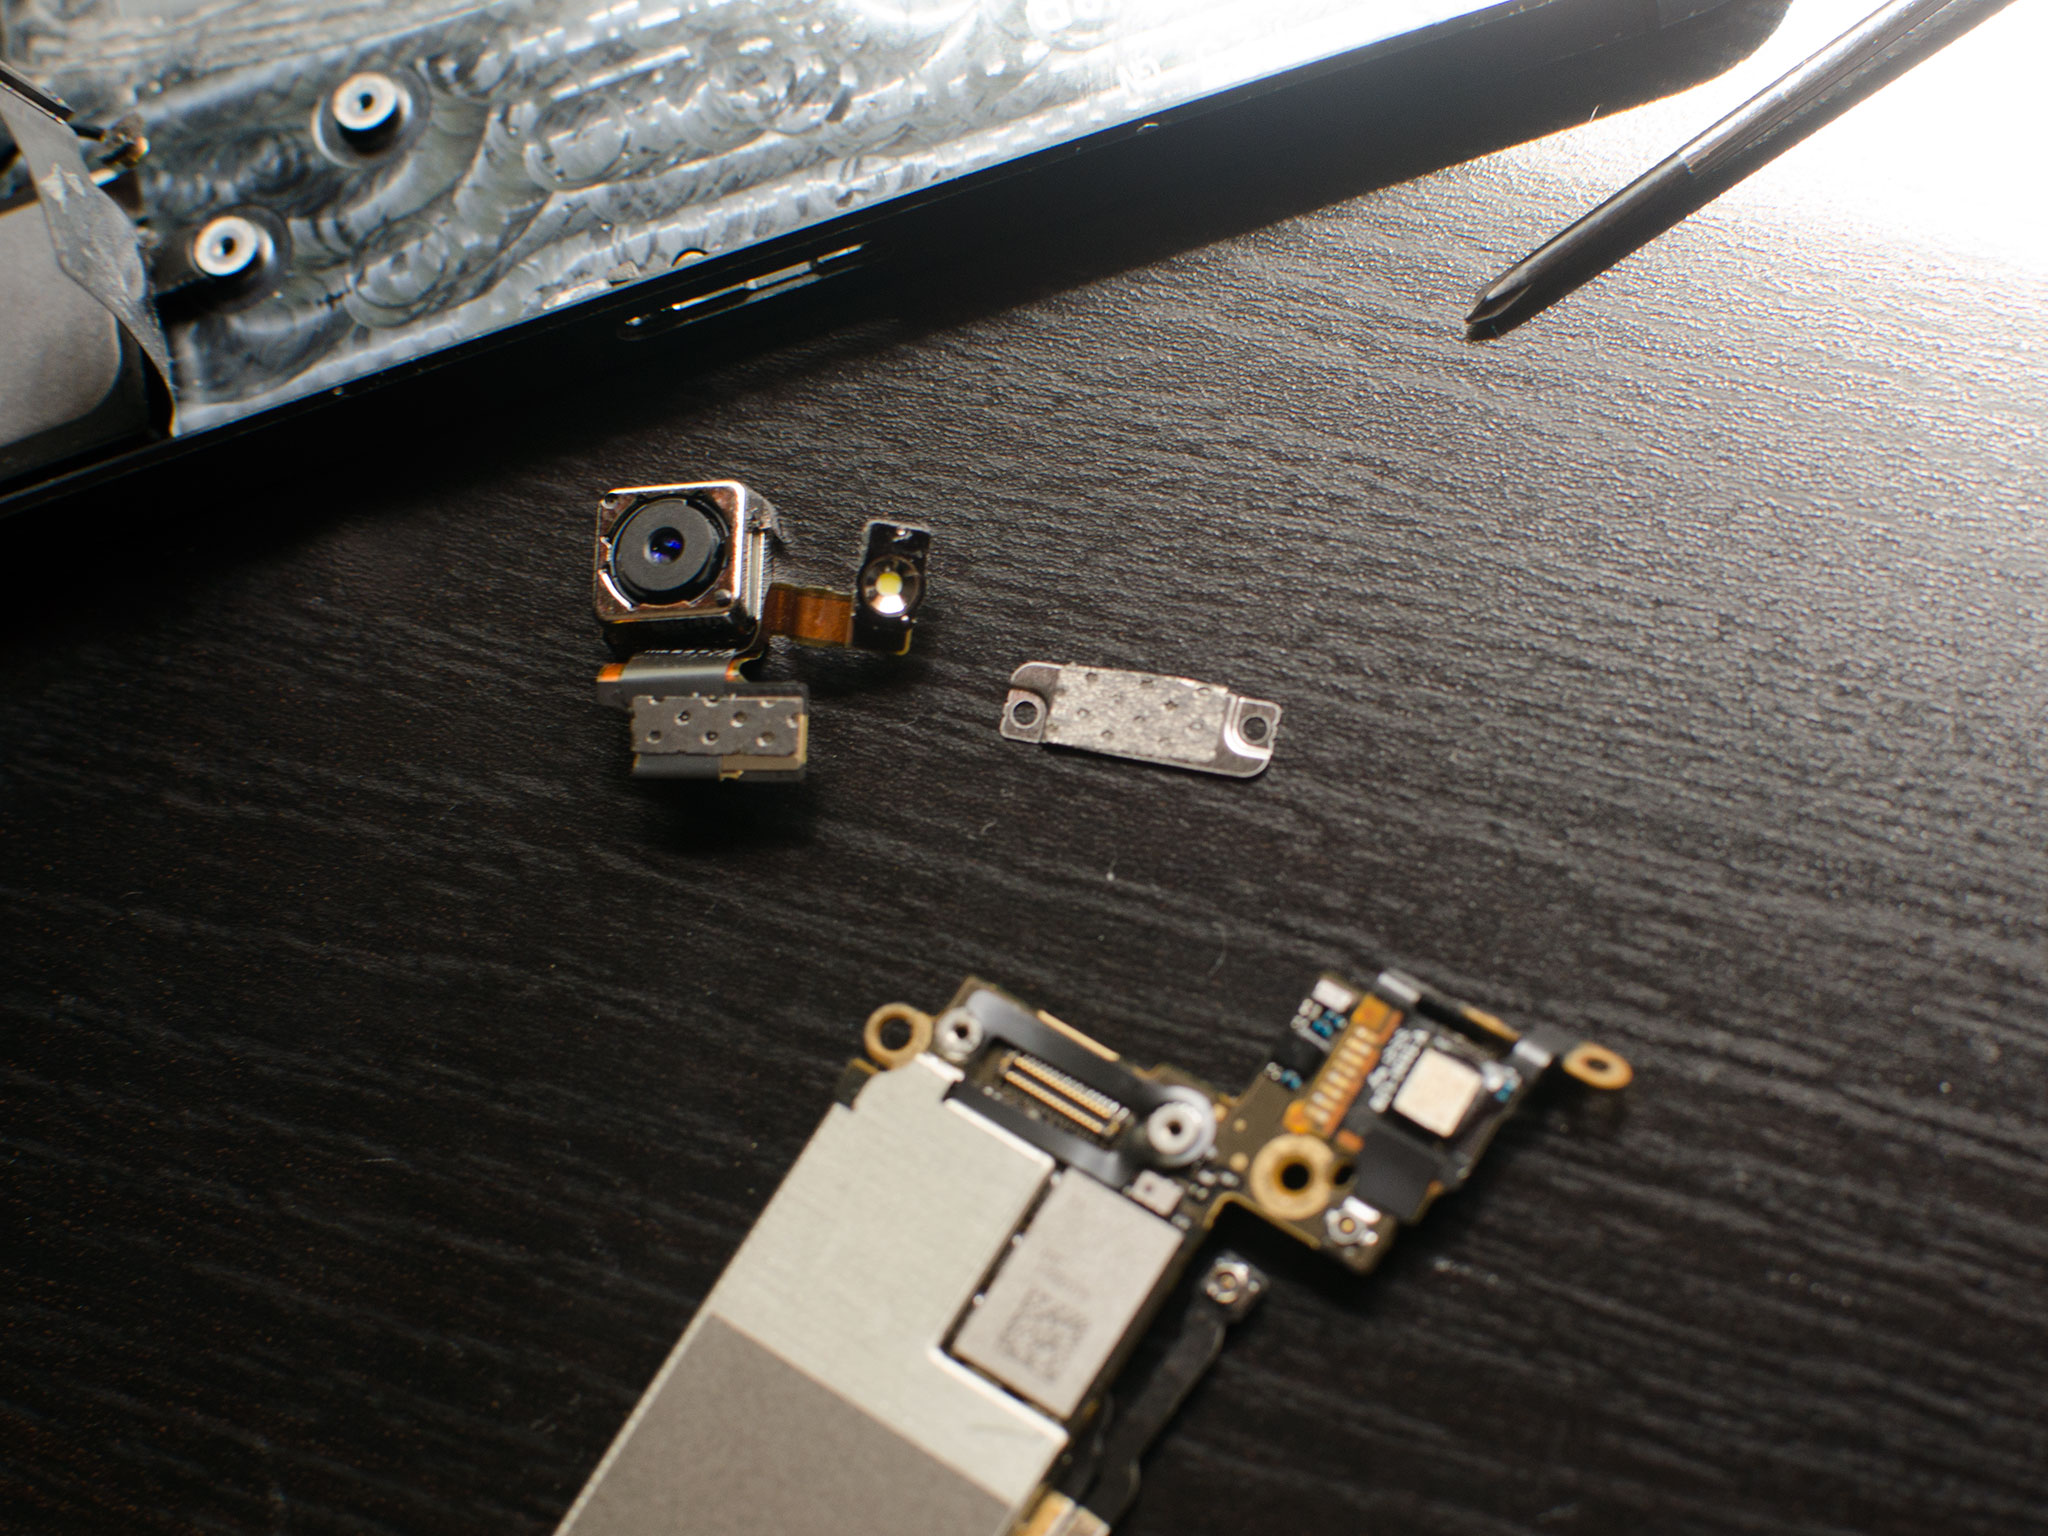 How to replace the iSight camera in an iPhone 5